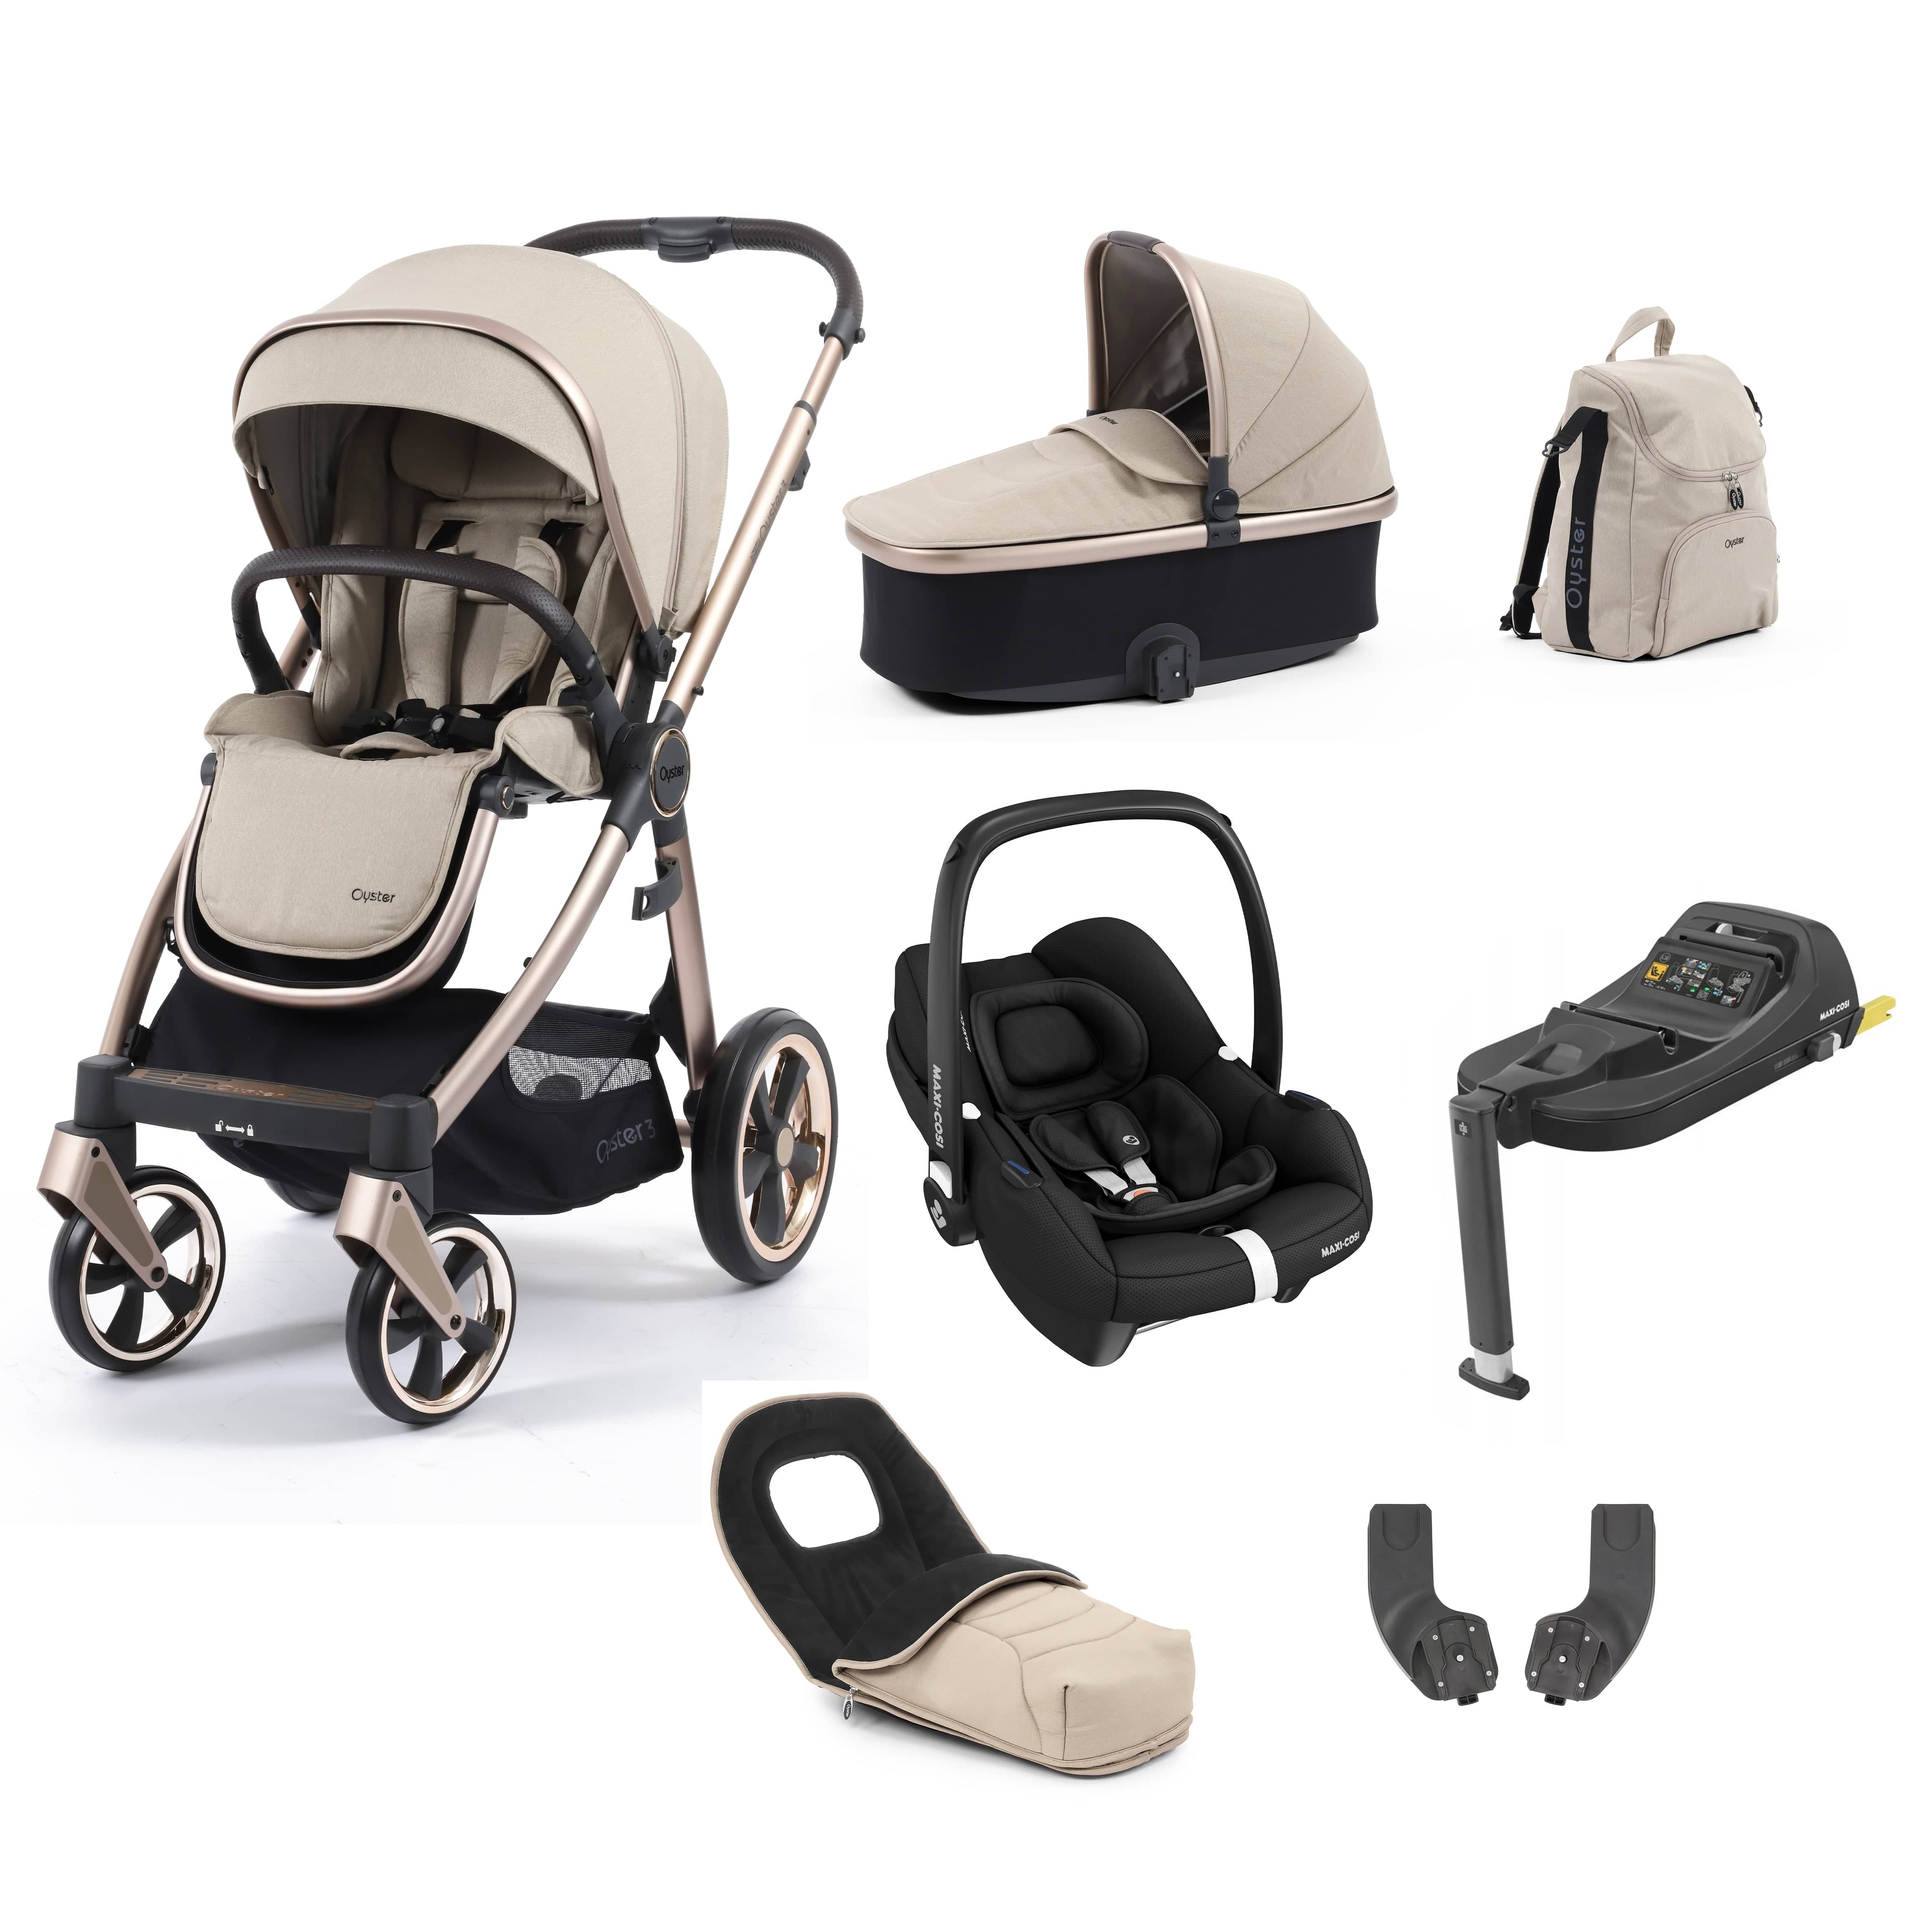 Babystyle Oyster 3 Luxury 7 Piece with Car Seat Bundle in Creme Brulee Travel Systems 14811-CMB 5060711567235